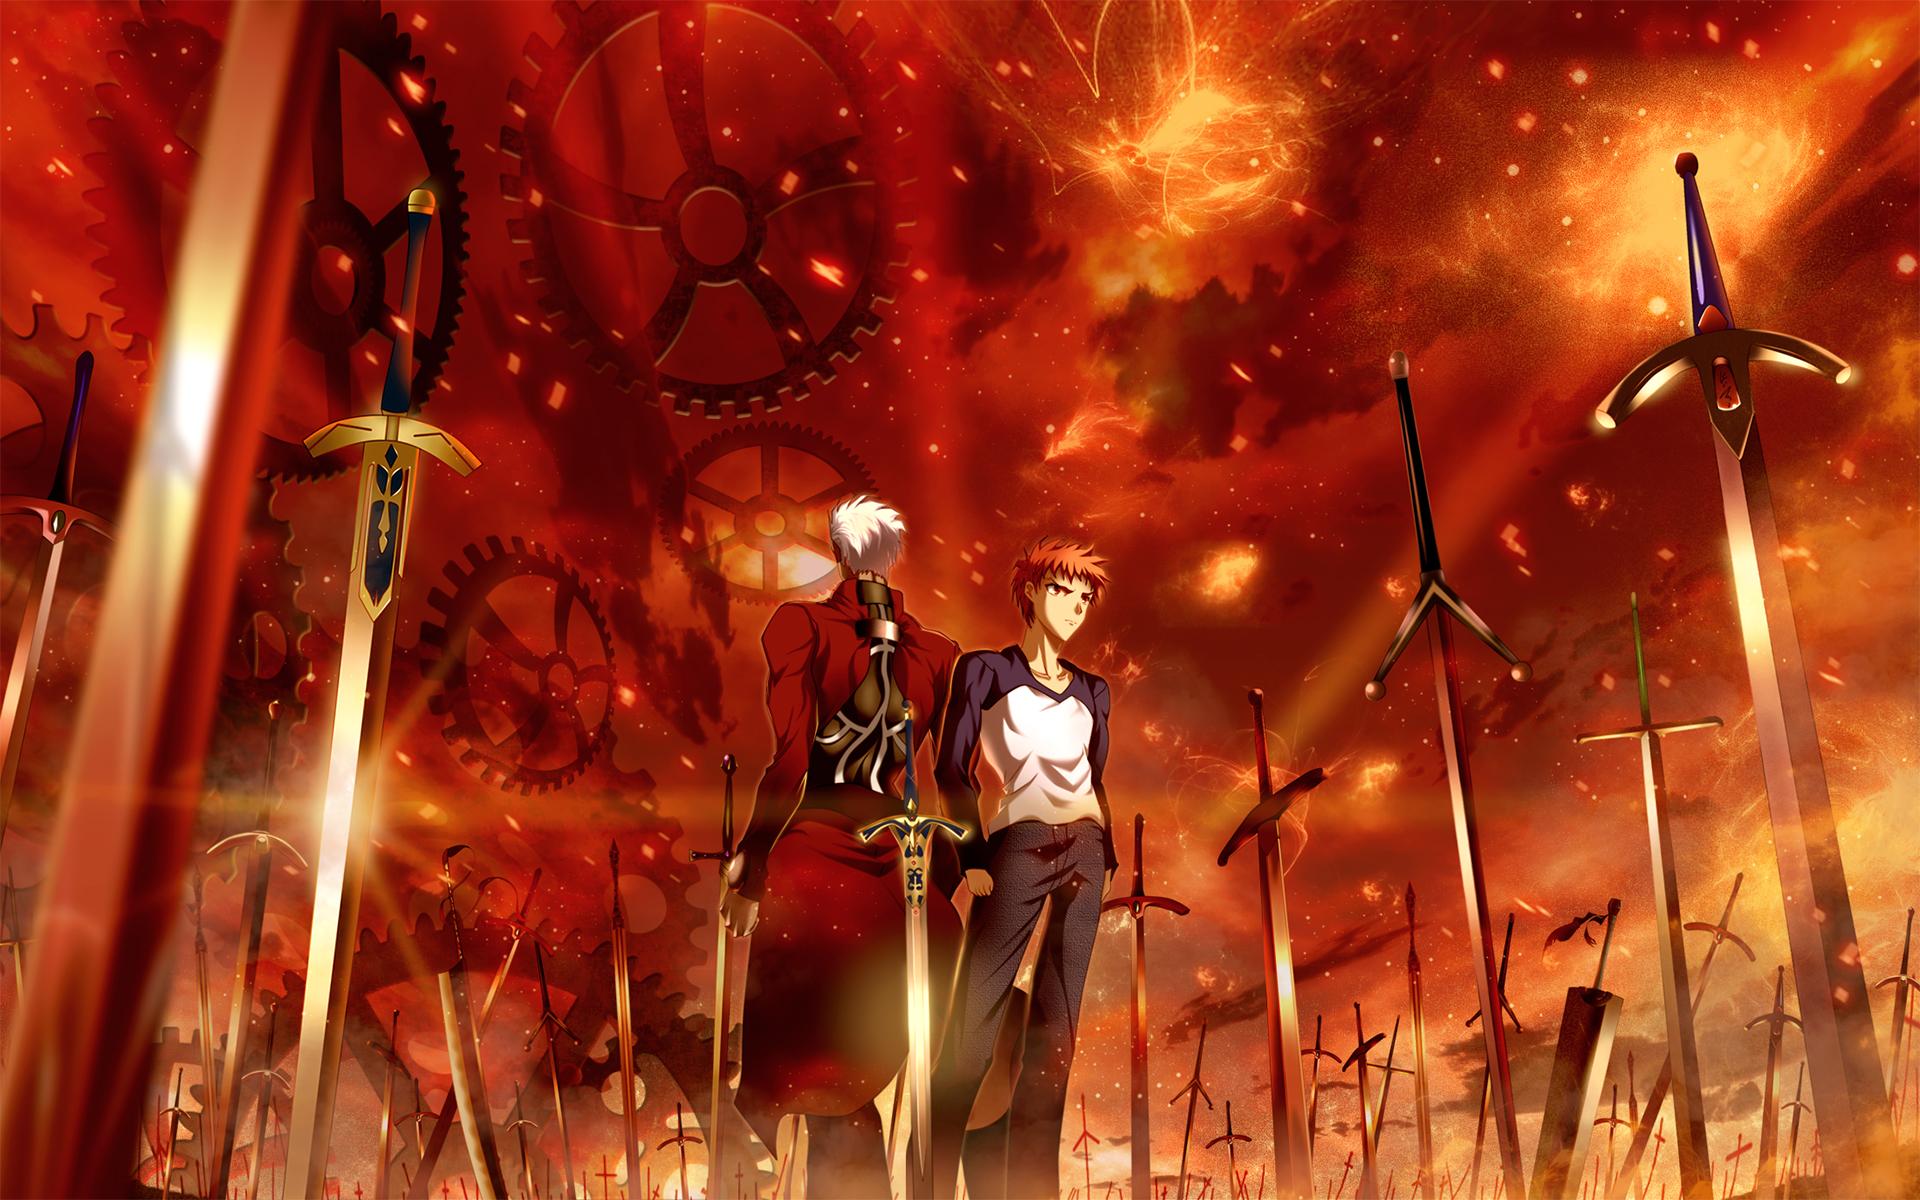 Fate Stay Night Unlimited Blade Works (TV series)